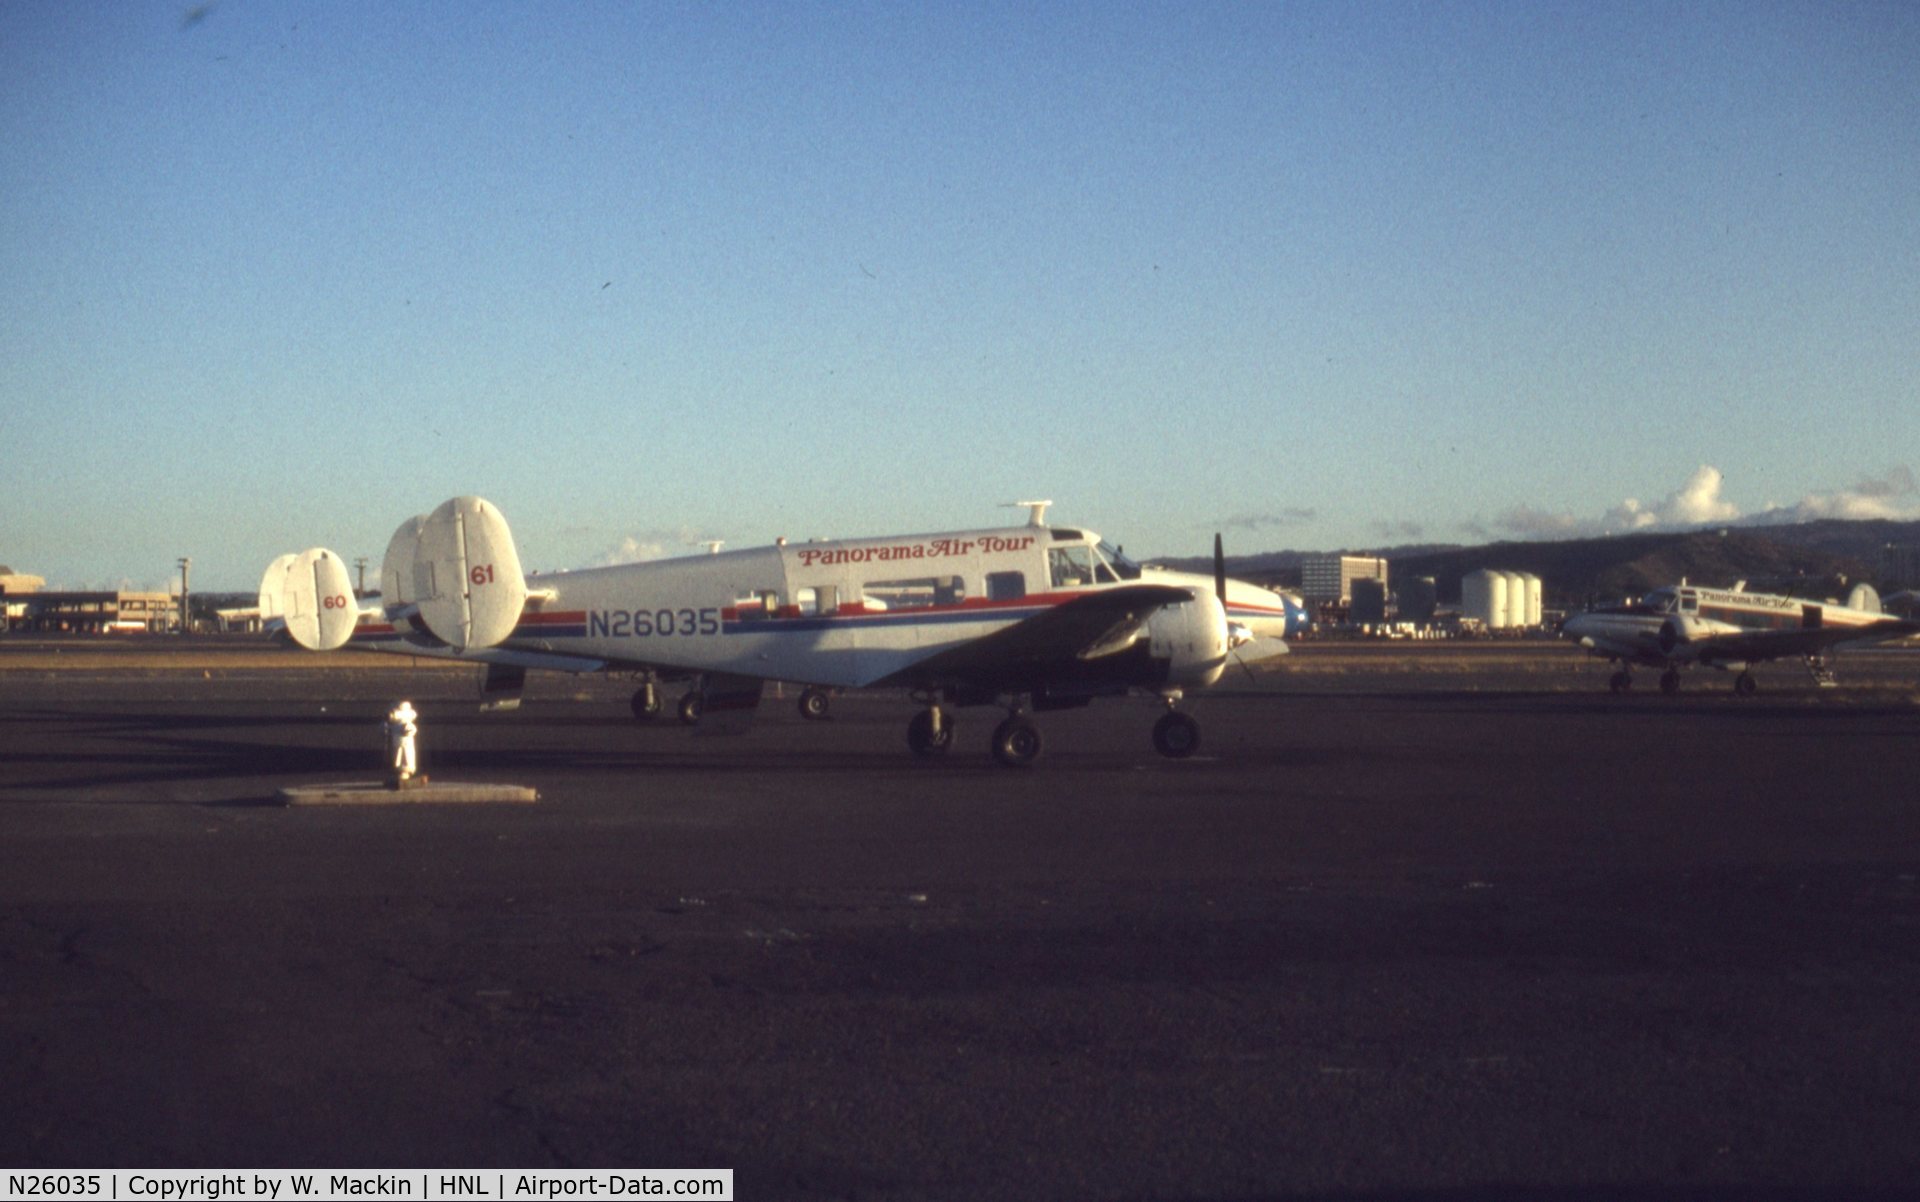 N26035, 1968 Beech H-18 C/N BA-754, Picture taken in Honolulu, HI, May 1979,  before boarding the plane for a tour of the Hawaiian islands.